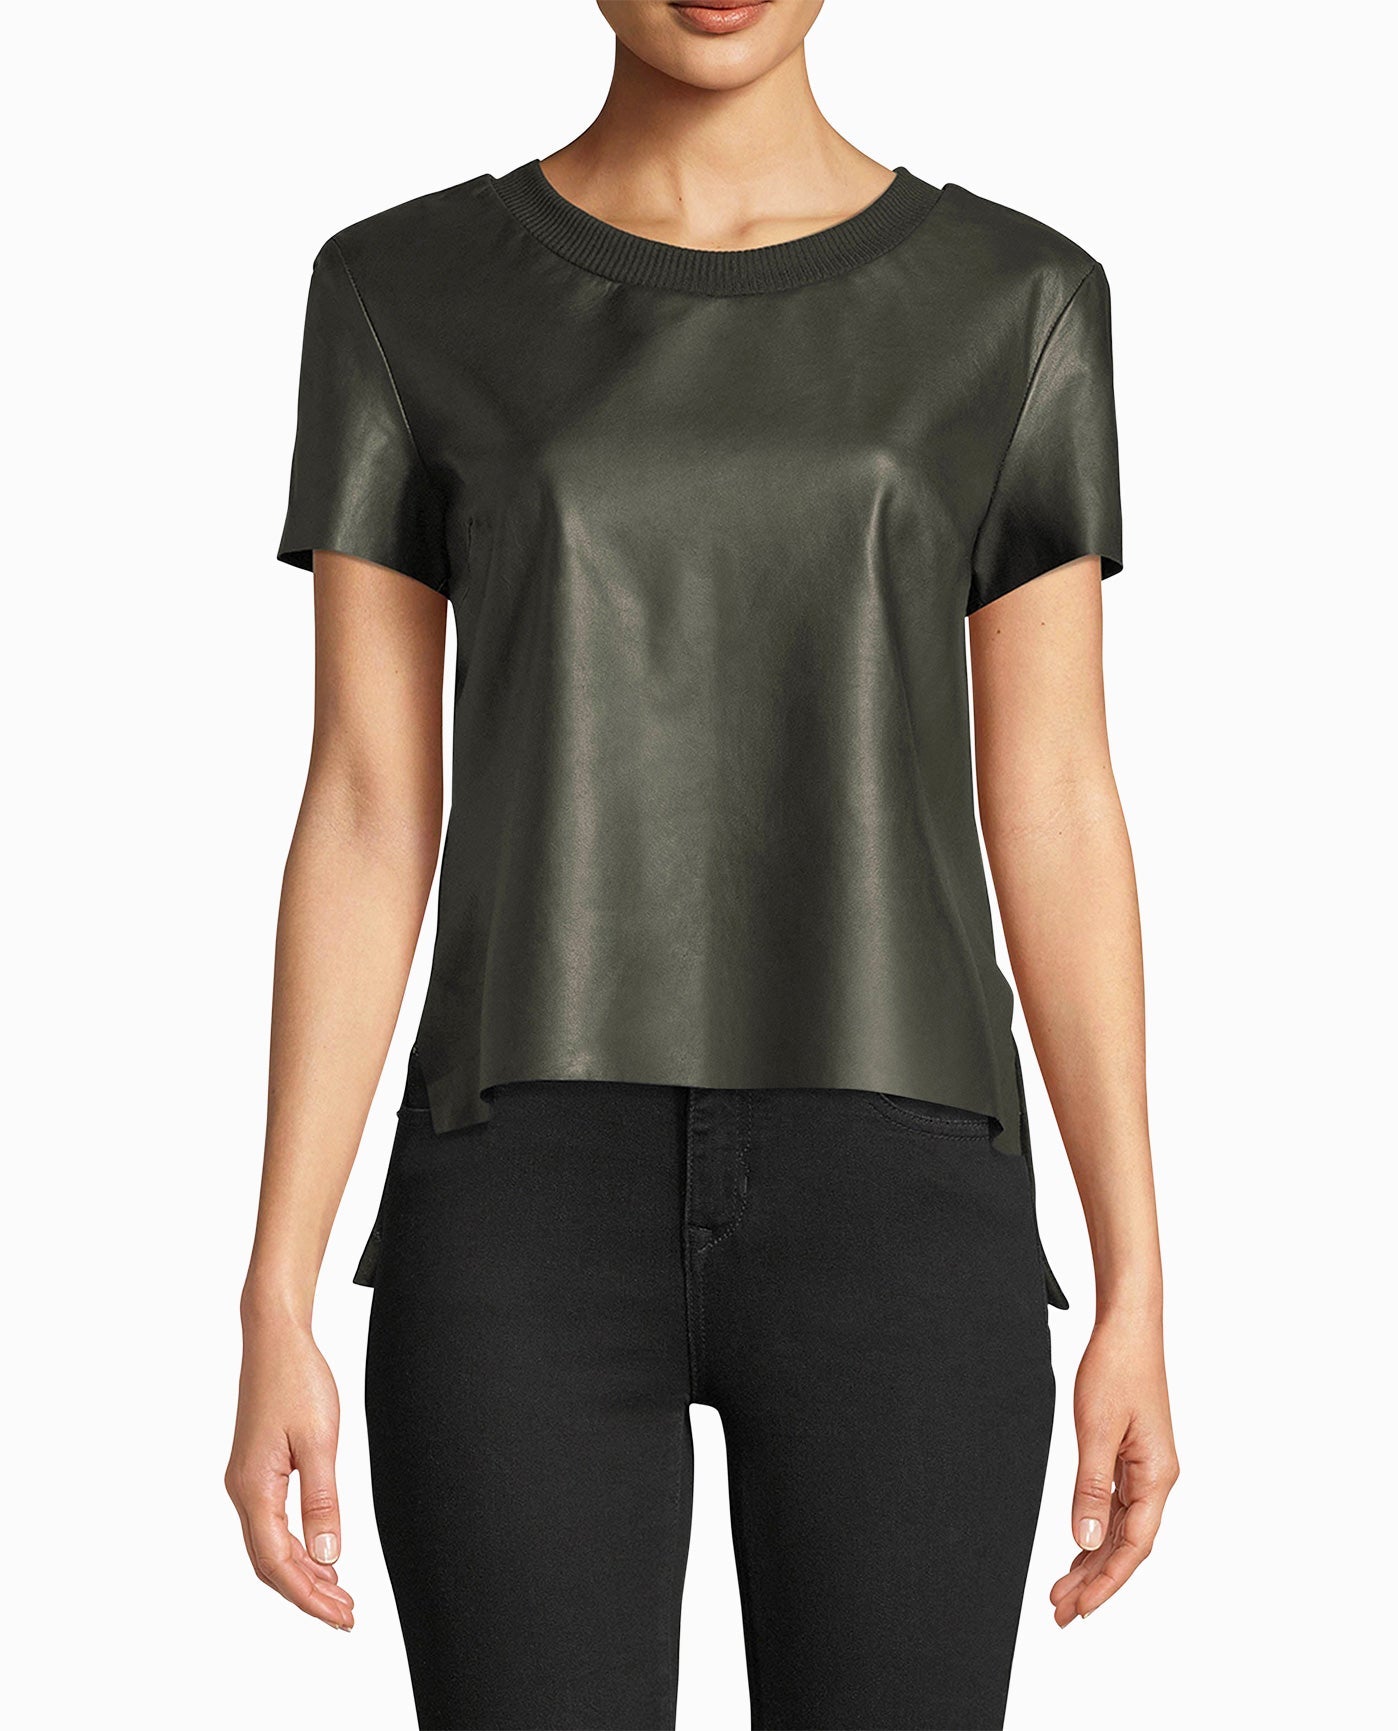 Leather T-Shirt Nicole Miller